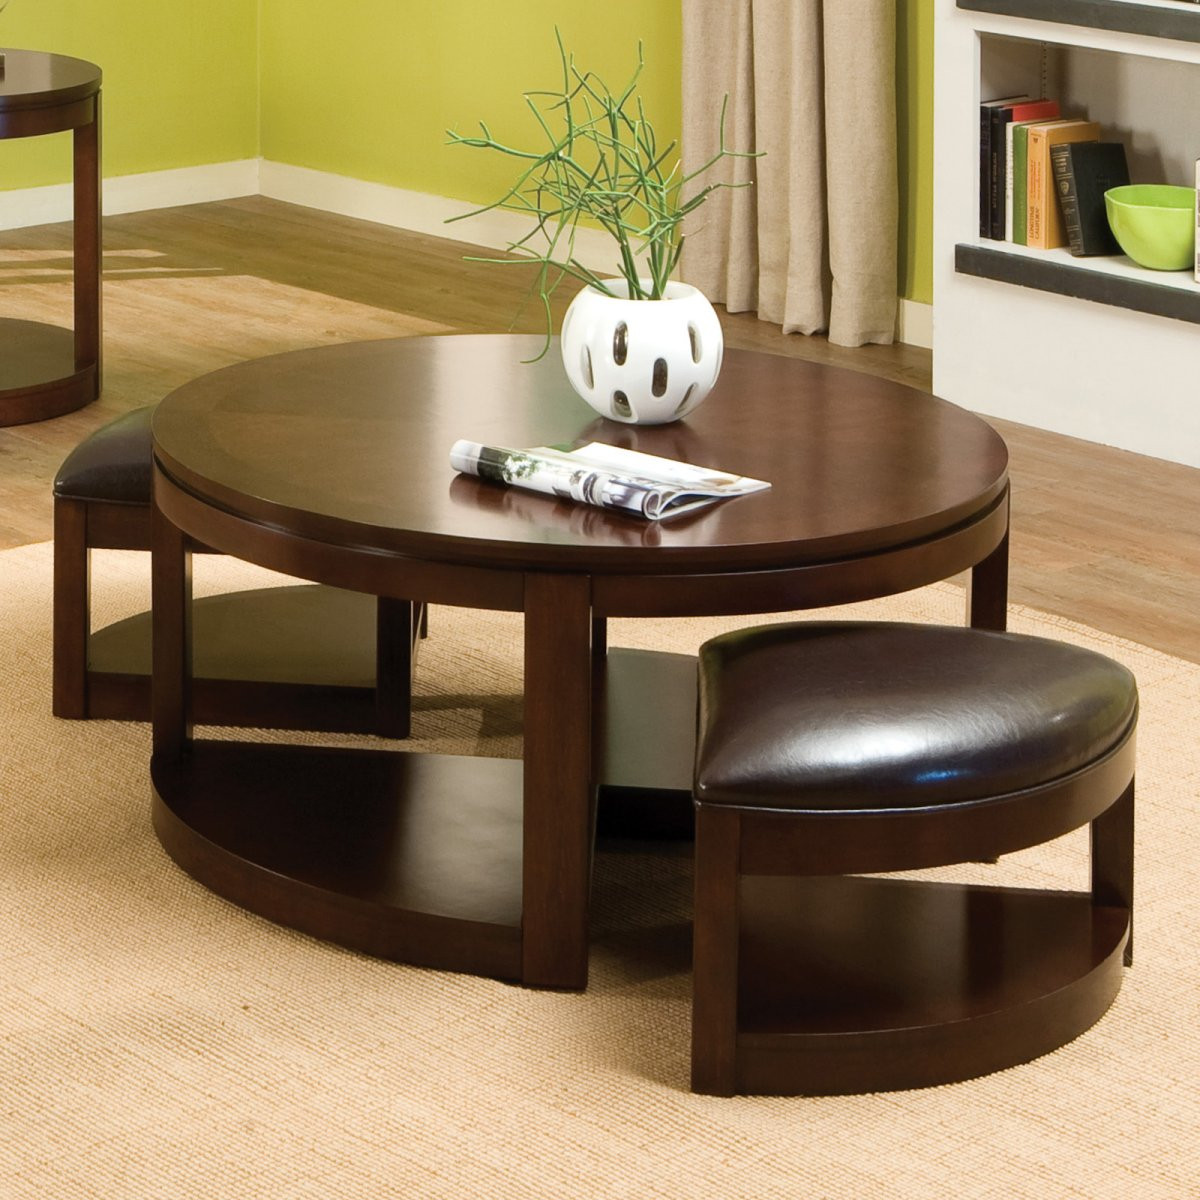 Living Room Table With Storage
 The Round Coffee Tables with Storage – the Simple and